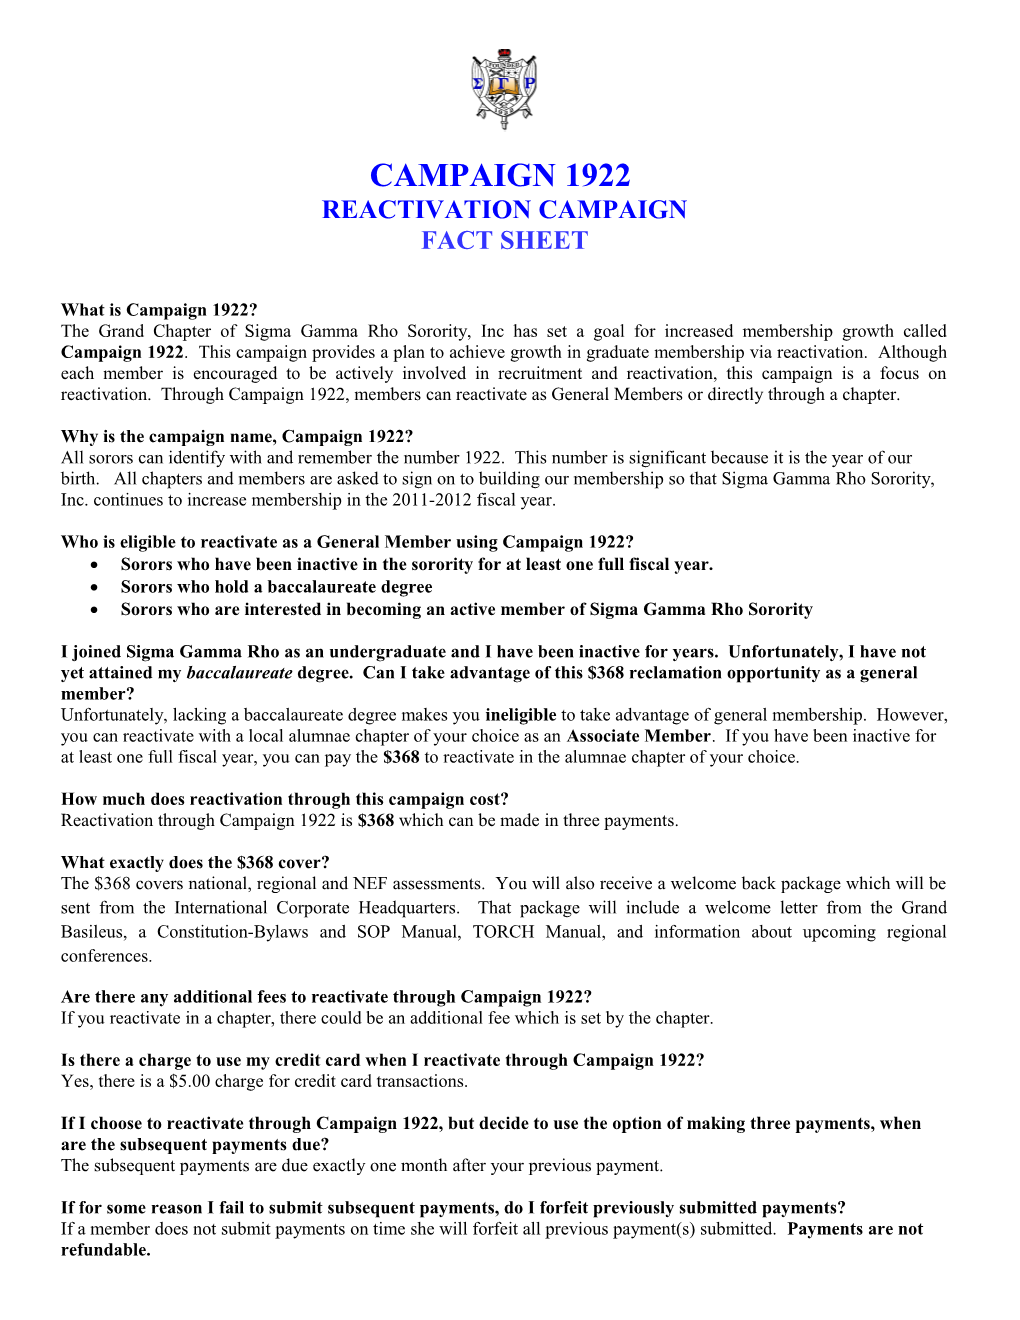 Campaign 1922 Quick Fact Sheet